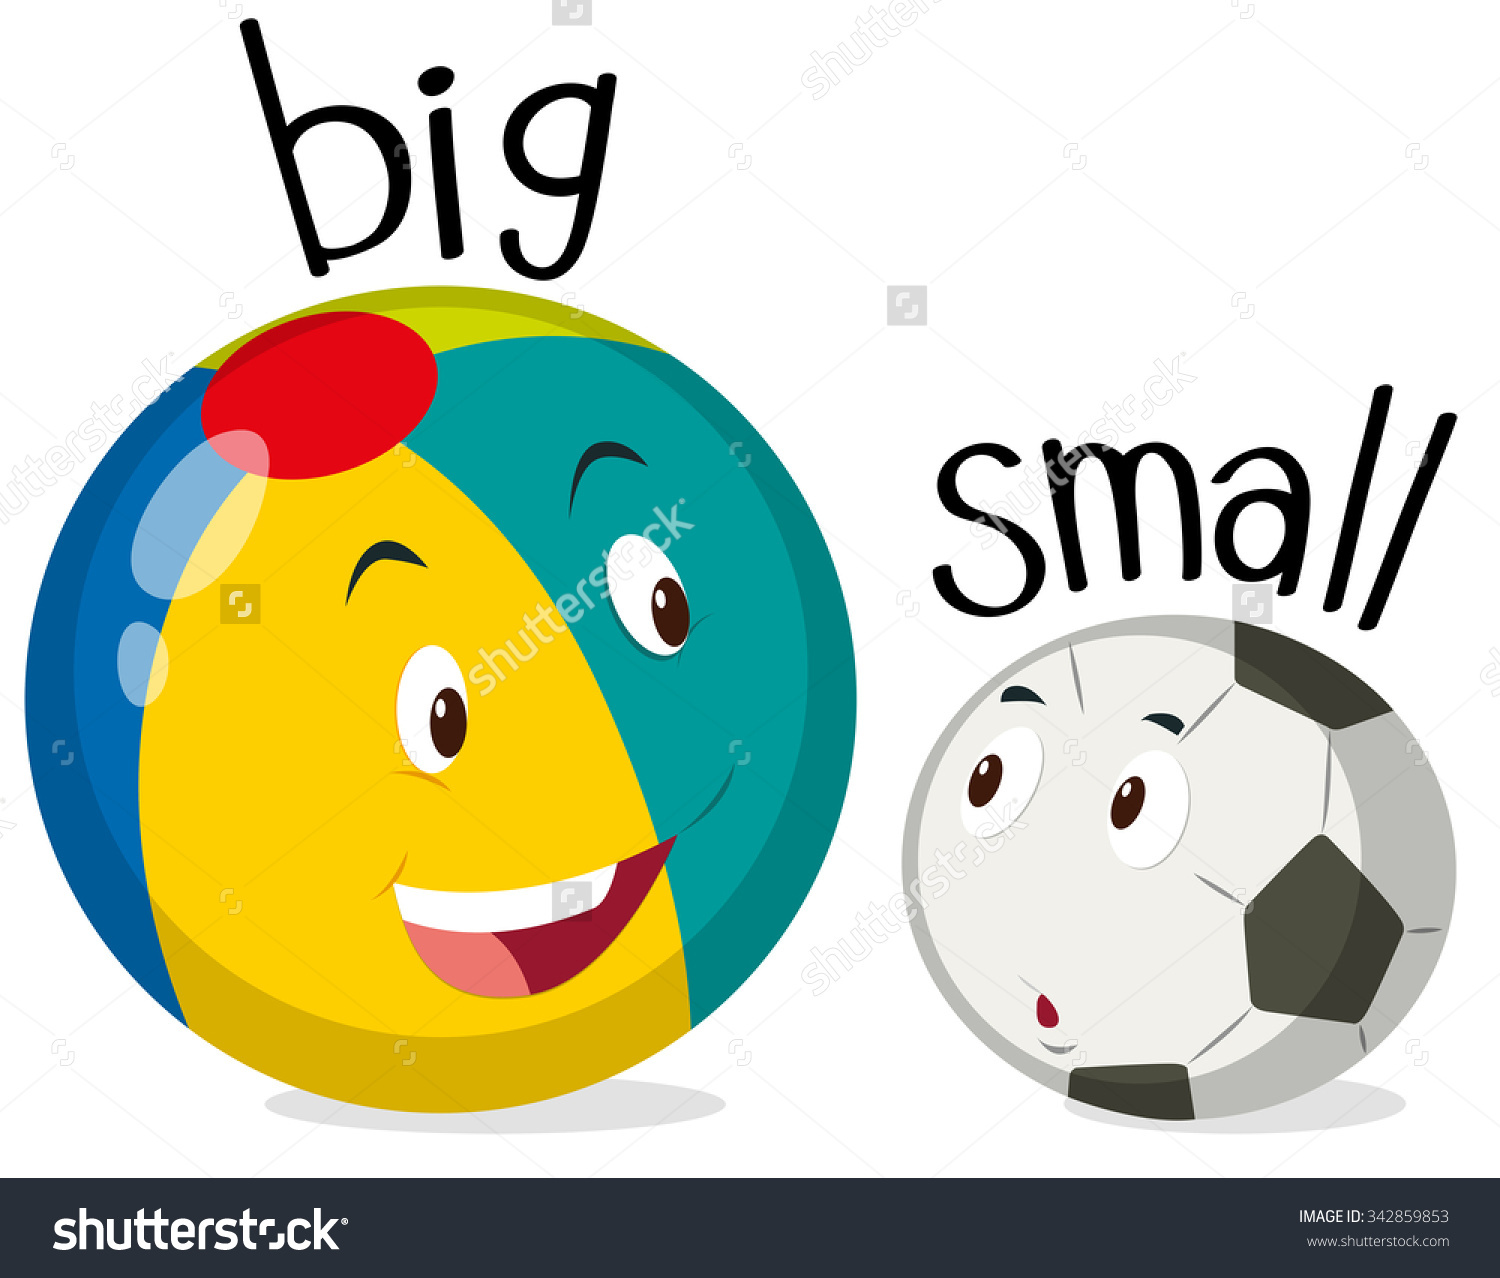 Big and small clipart - Clipground